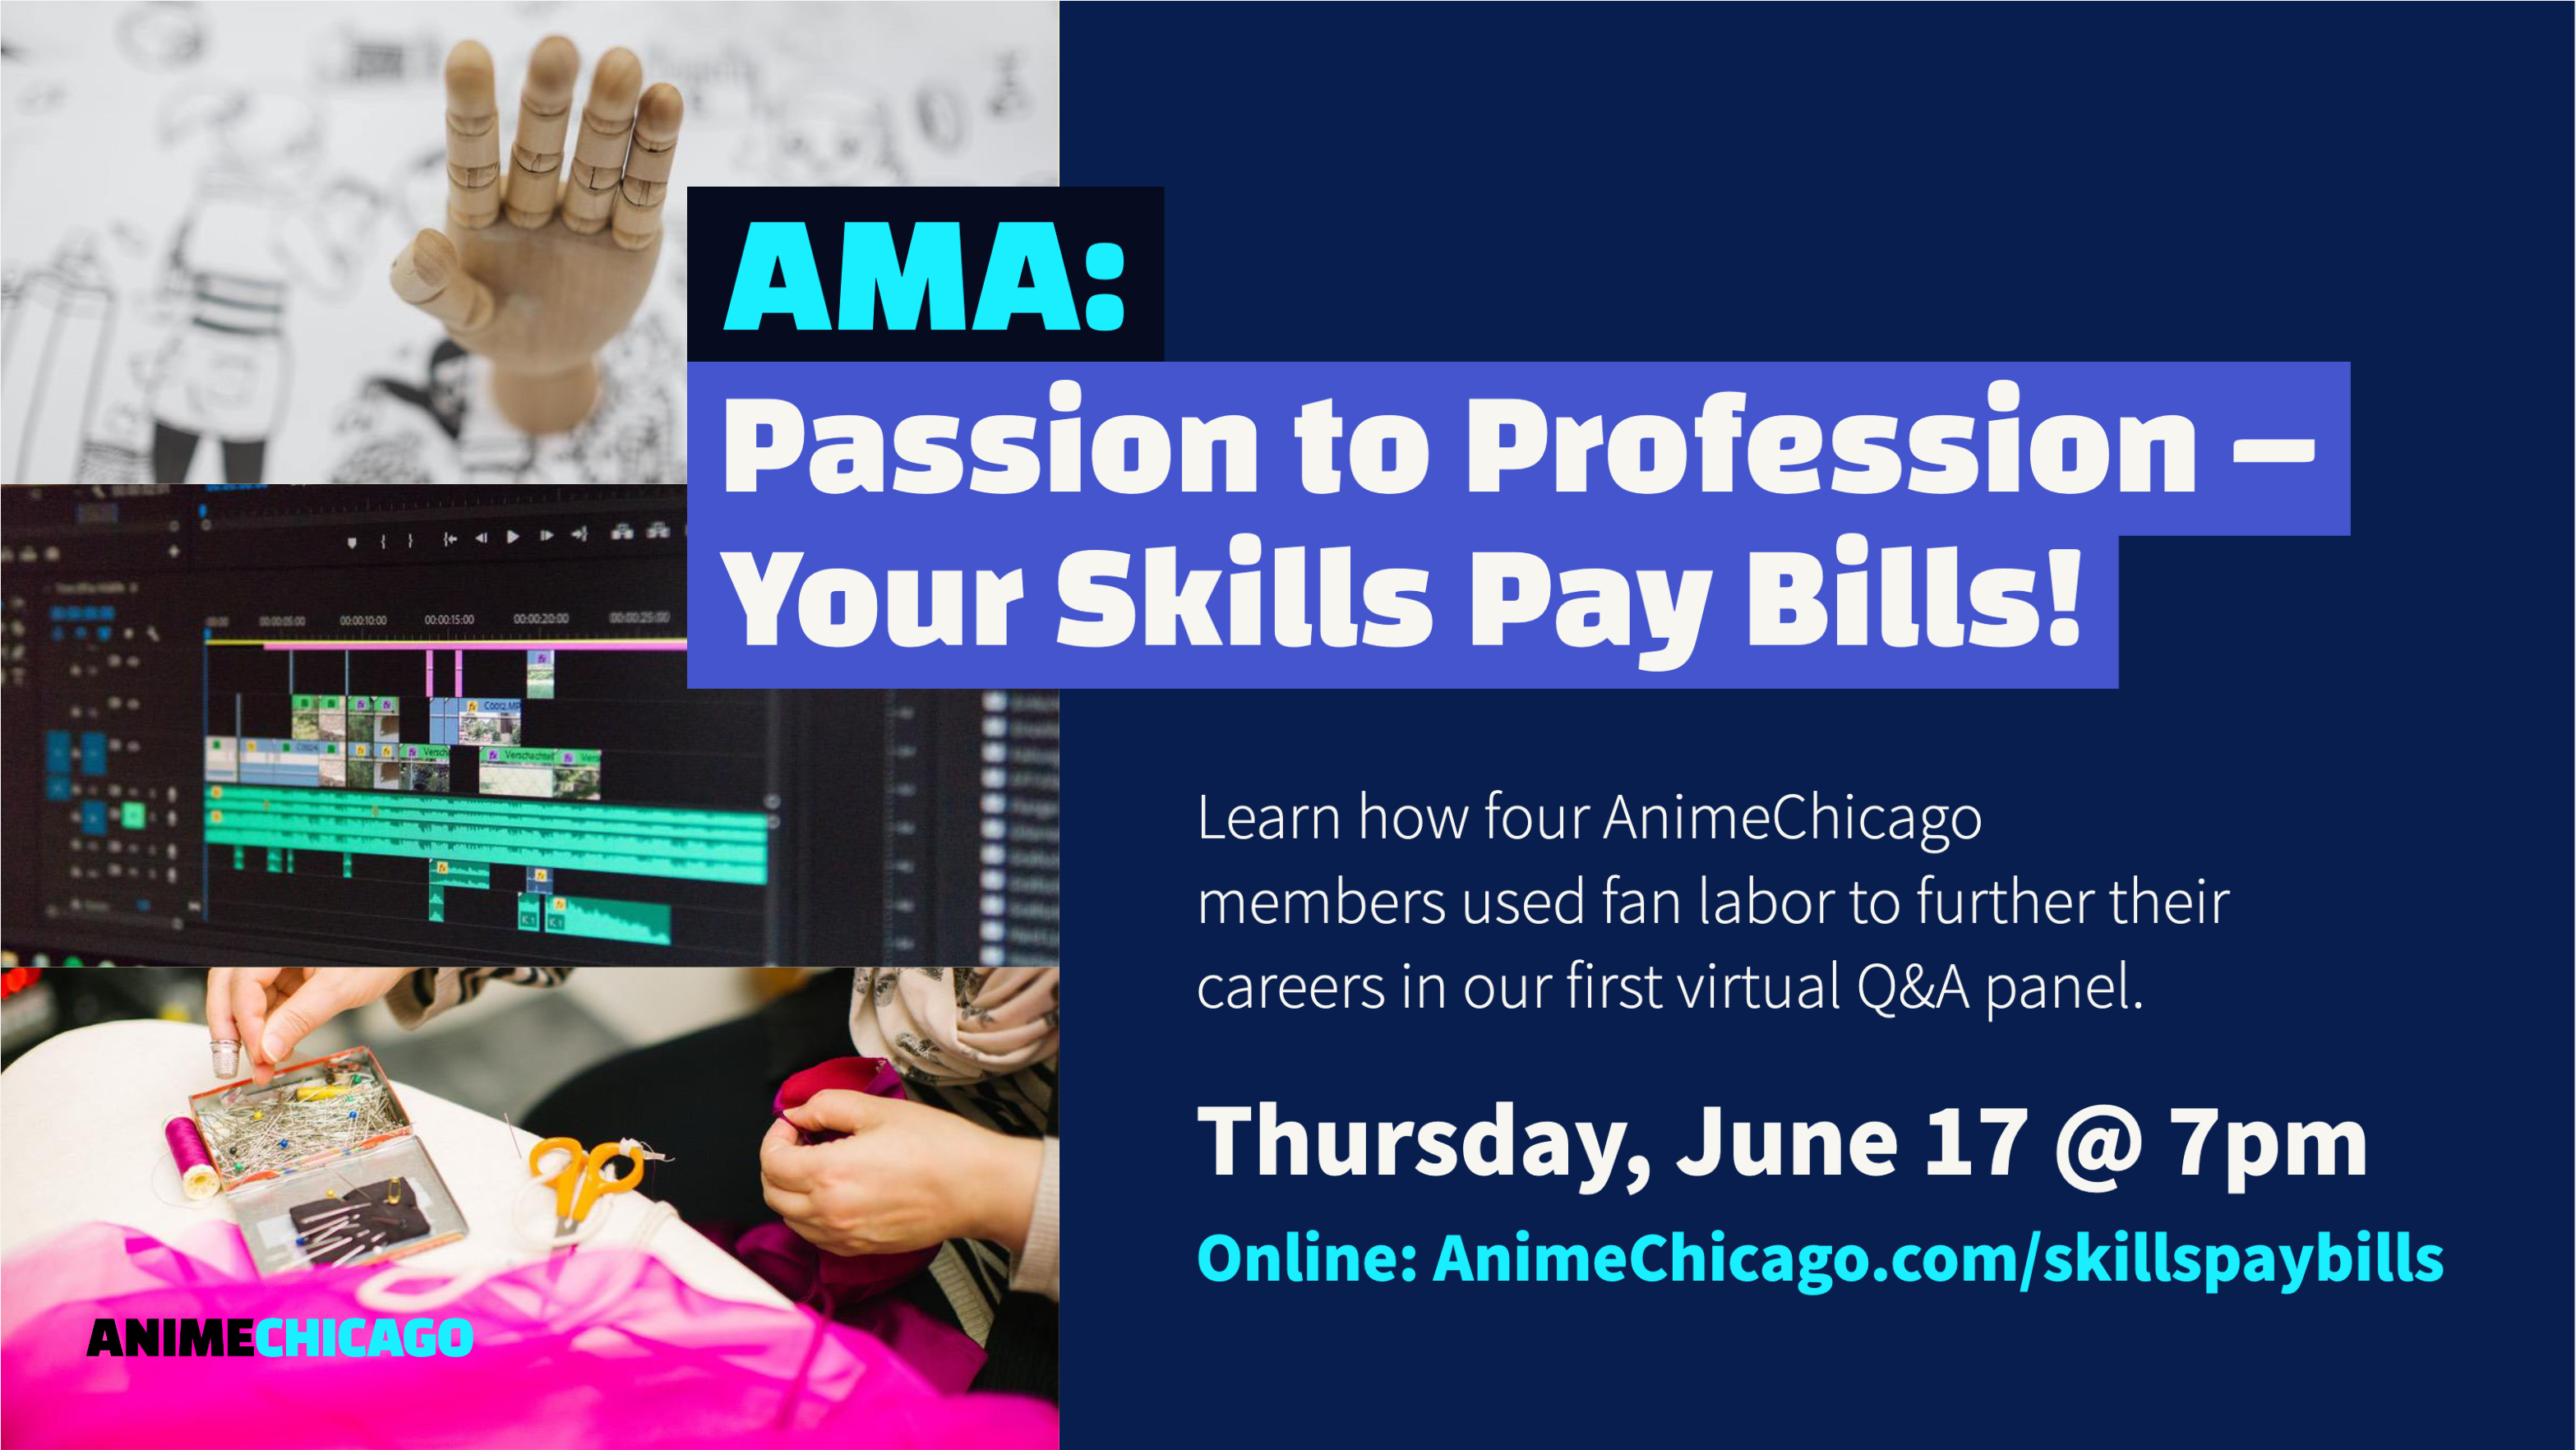 Learn how your skills pay bills at “AMA: Passion to Profession”